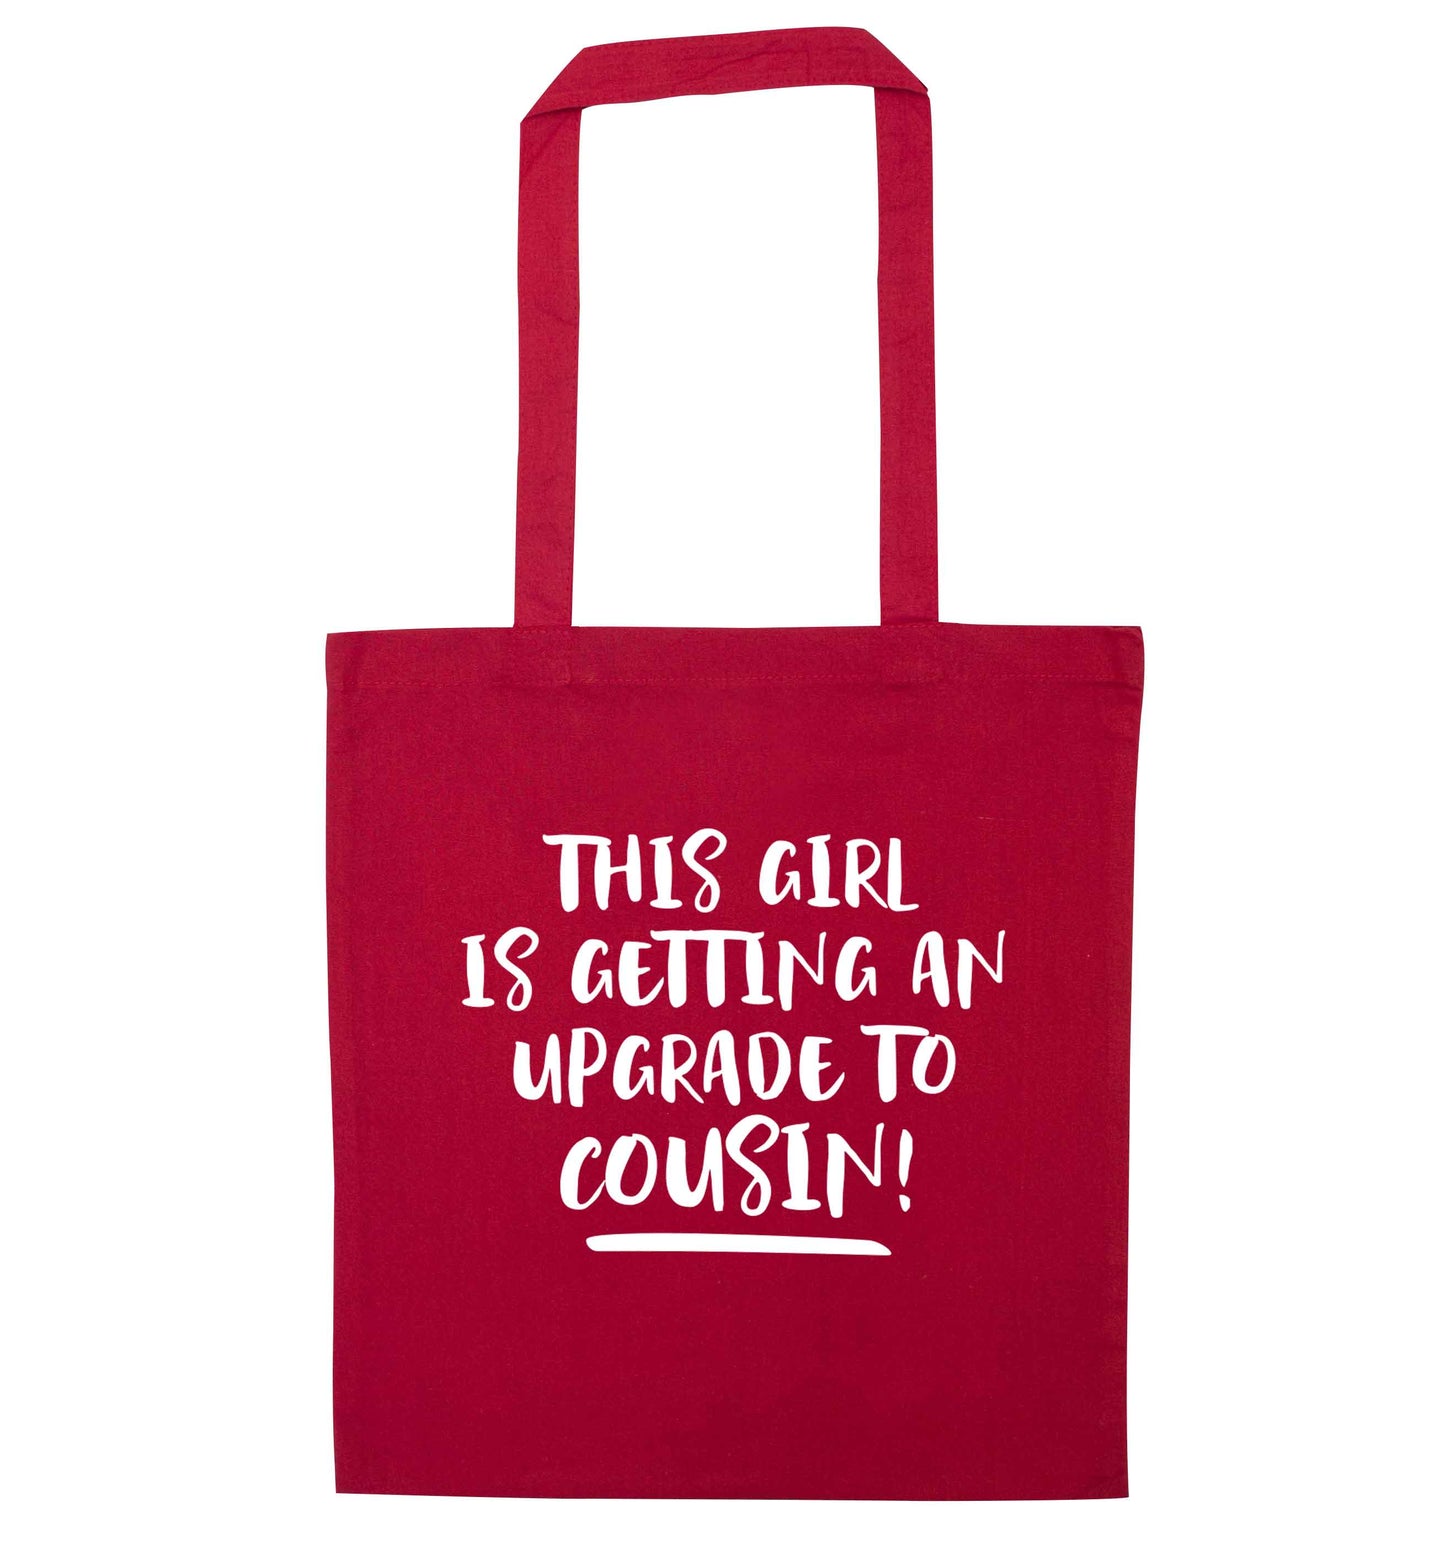 This girl is getting an upgrade to cousin! red tote bag